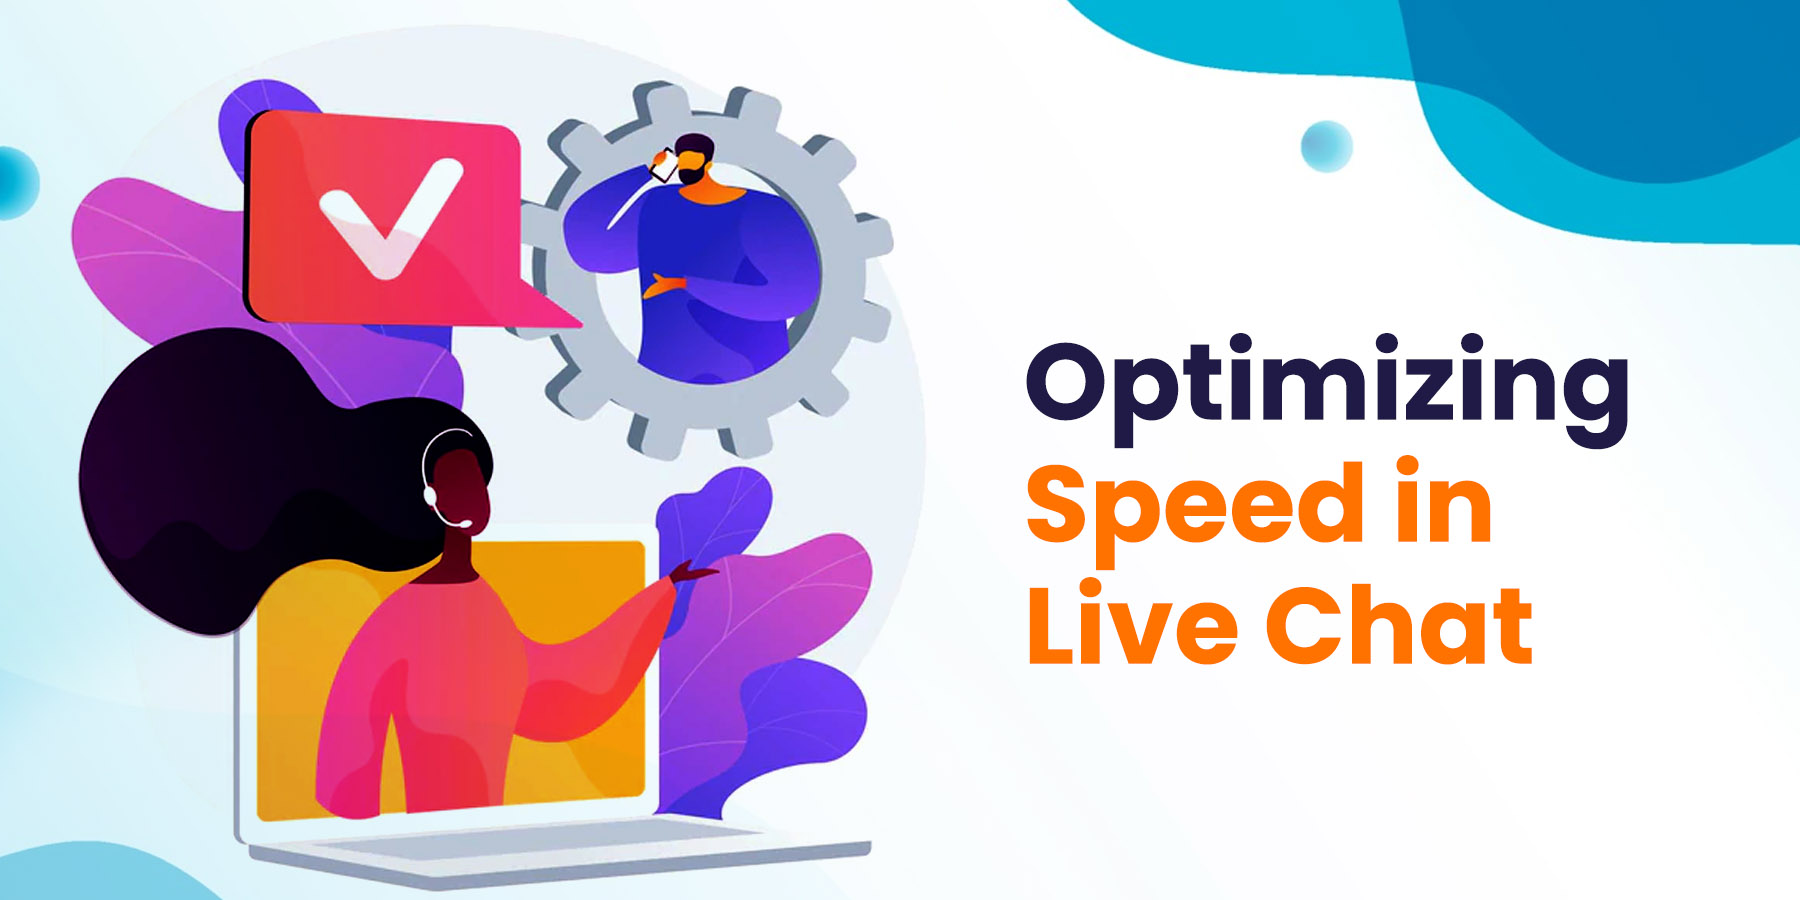 Optimizing Speed in Live Chat